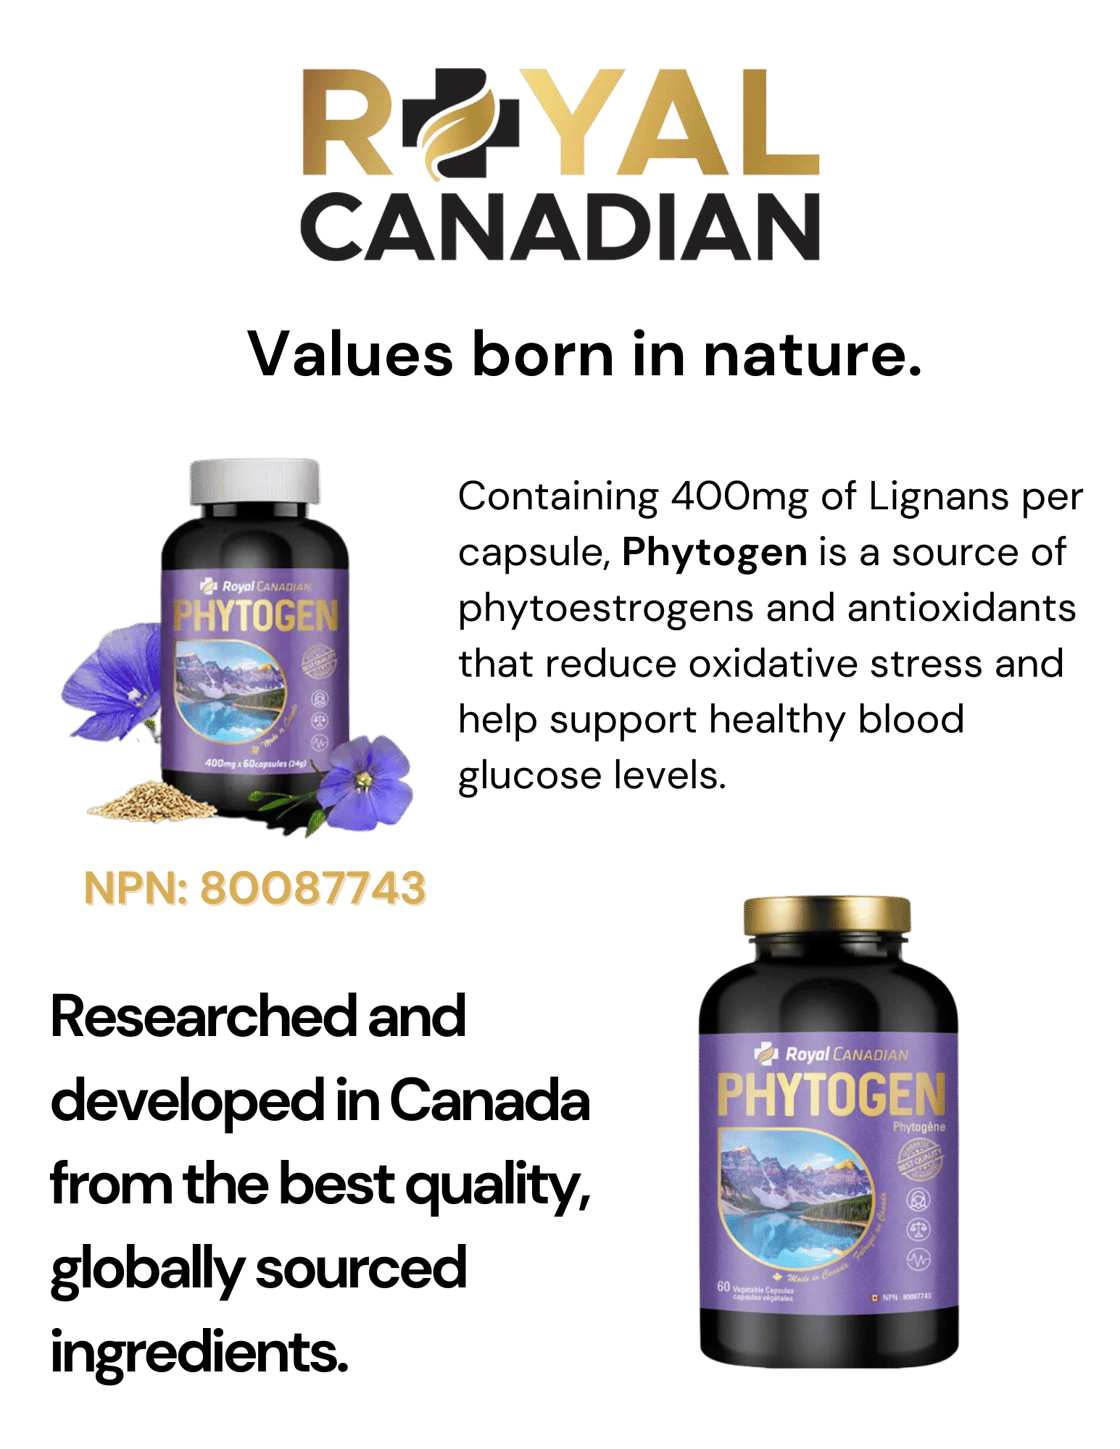 With 400mg of Lignans per capsule, Phytogen is a source of phytoestrogens and antioxidants that reduce oxidative stress and help support healthy blood glucose levels. (1)